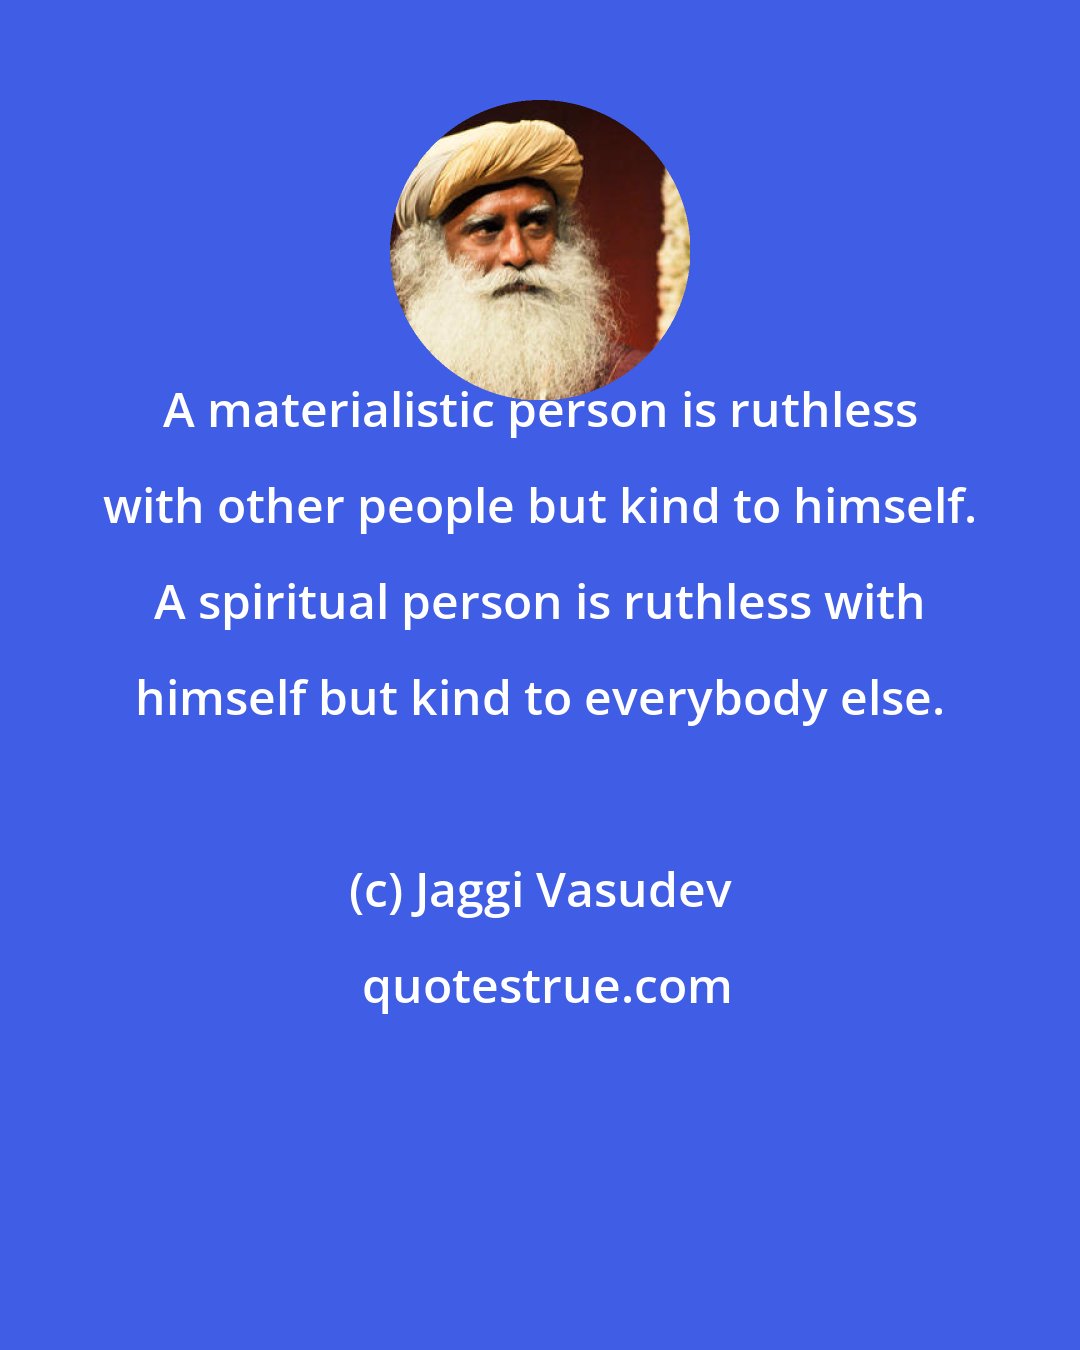 Jaggi Vasudev: A materialistic person is ruthless with other people but kind to himself. A spiritual person is ruthless with himself but kind to everybody else.